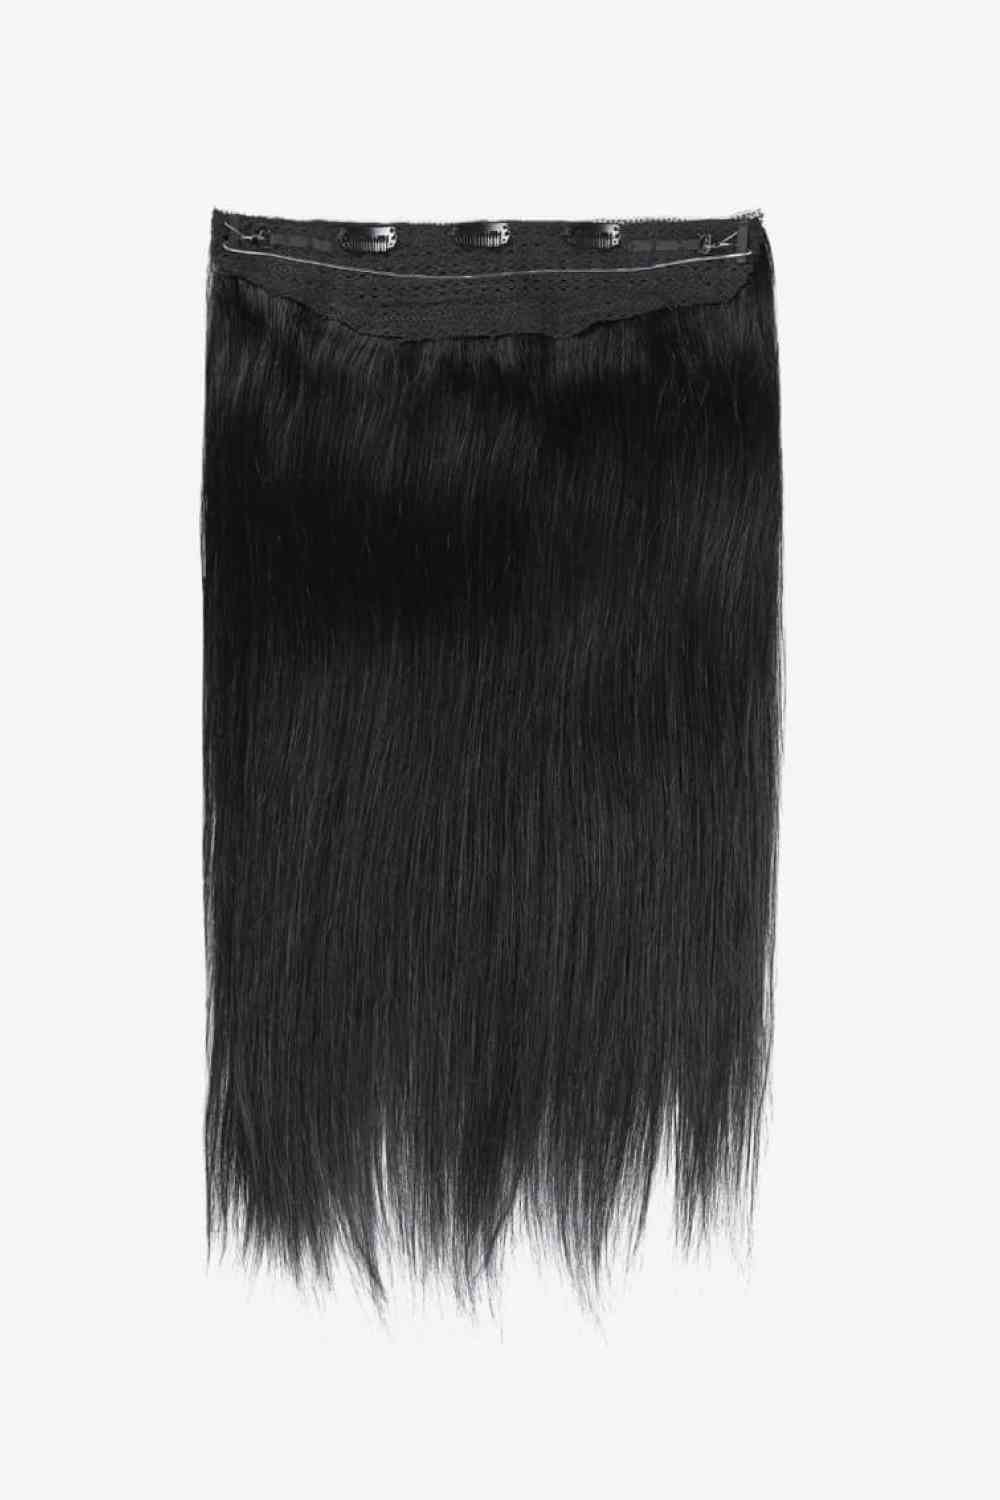 16" 80g Indian Human Halo Hair Black One Size